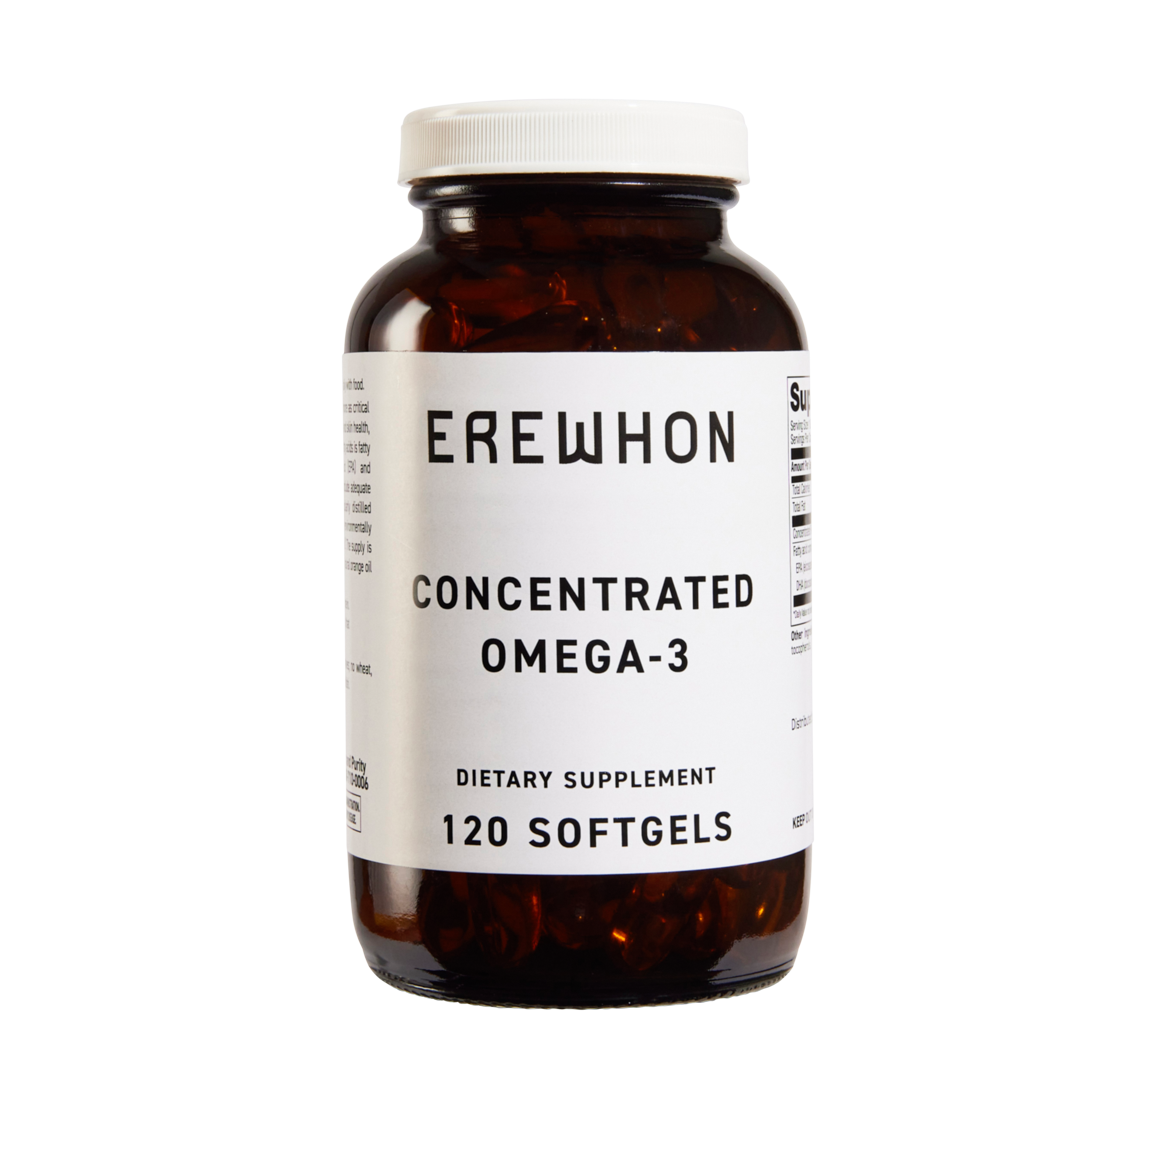 Erewhon Omega-3 1200mg supplement packaging, highlighting its benefits for heart, brain, and joint health